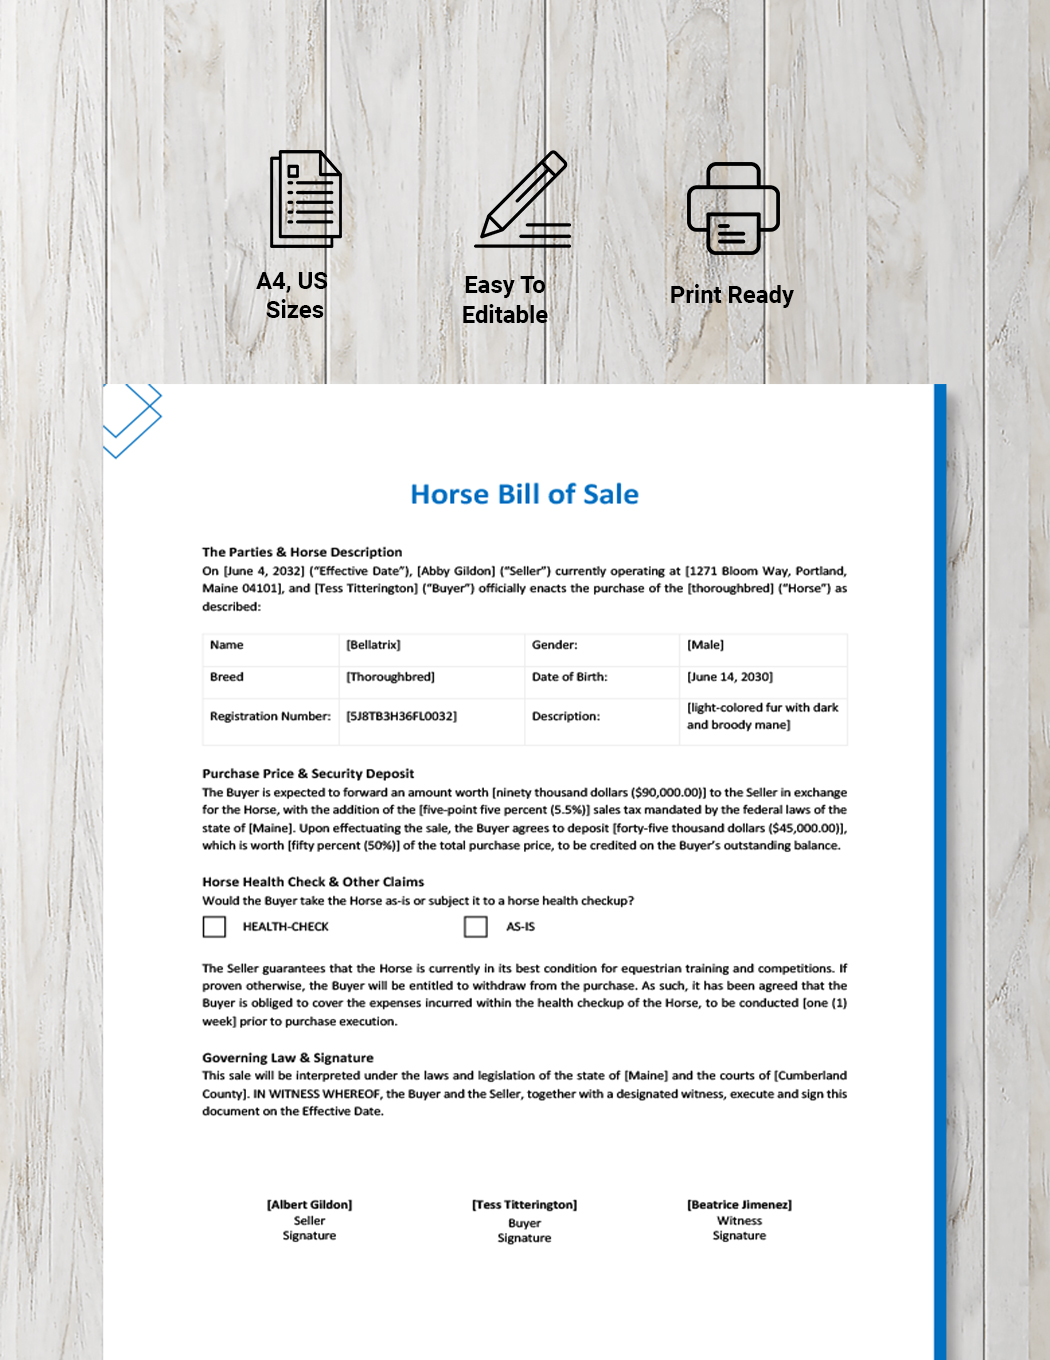 Horse Bill of Sale Template